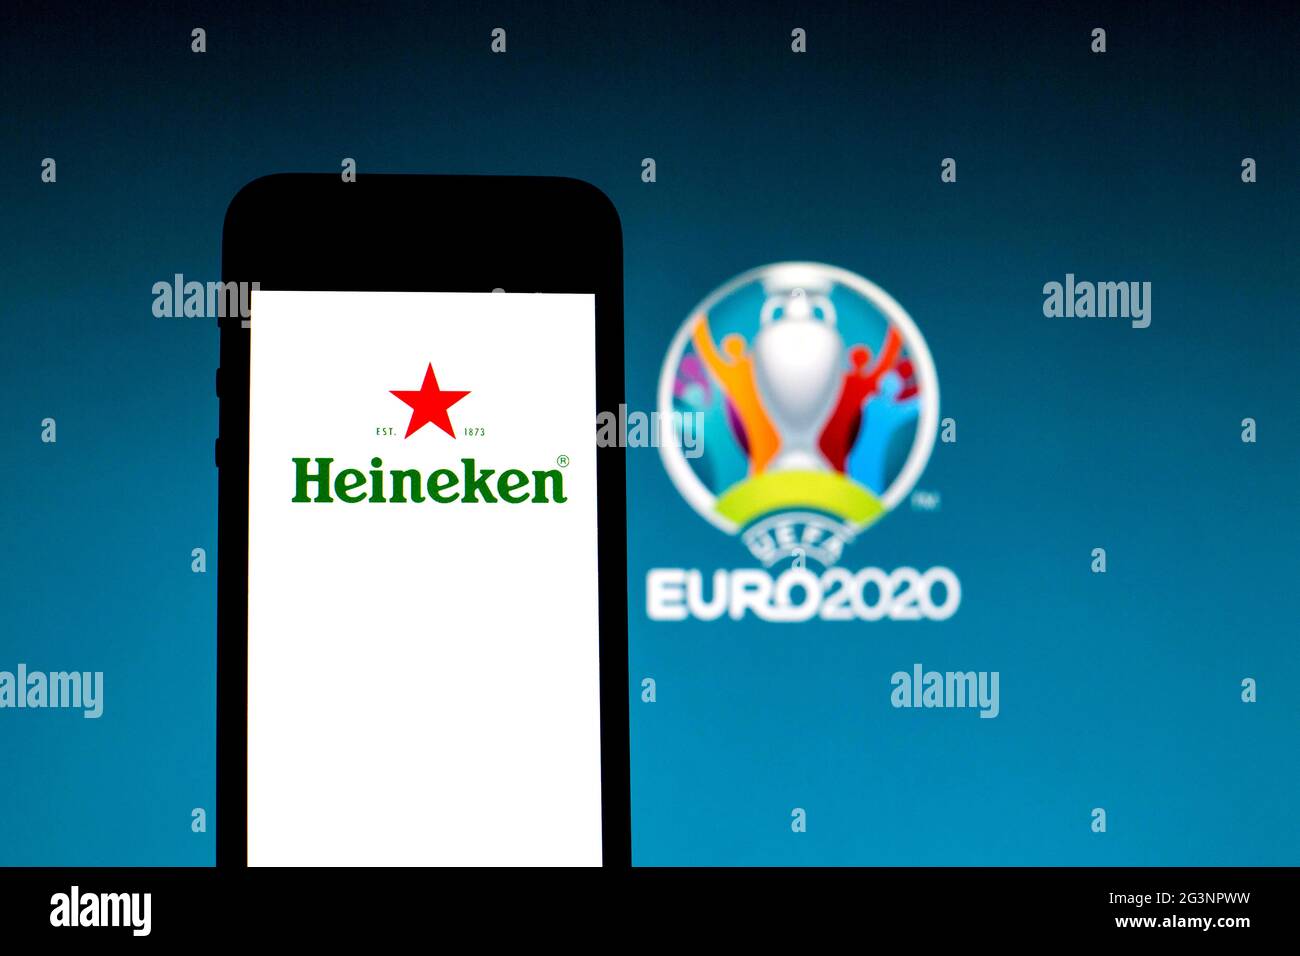 June 15, 2021, Spain: In this photo illustration a Heineken logo seen displayed on a smartphone with a UEFA Euro 2020 logo in the background. (Credit Image: © Thiago Prudencio/SOPA Images via ZUMA Wire) Stock Photo